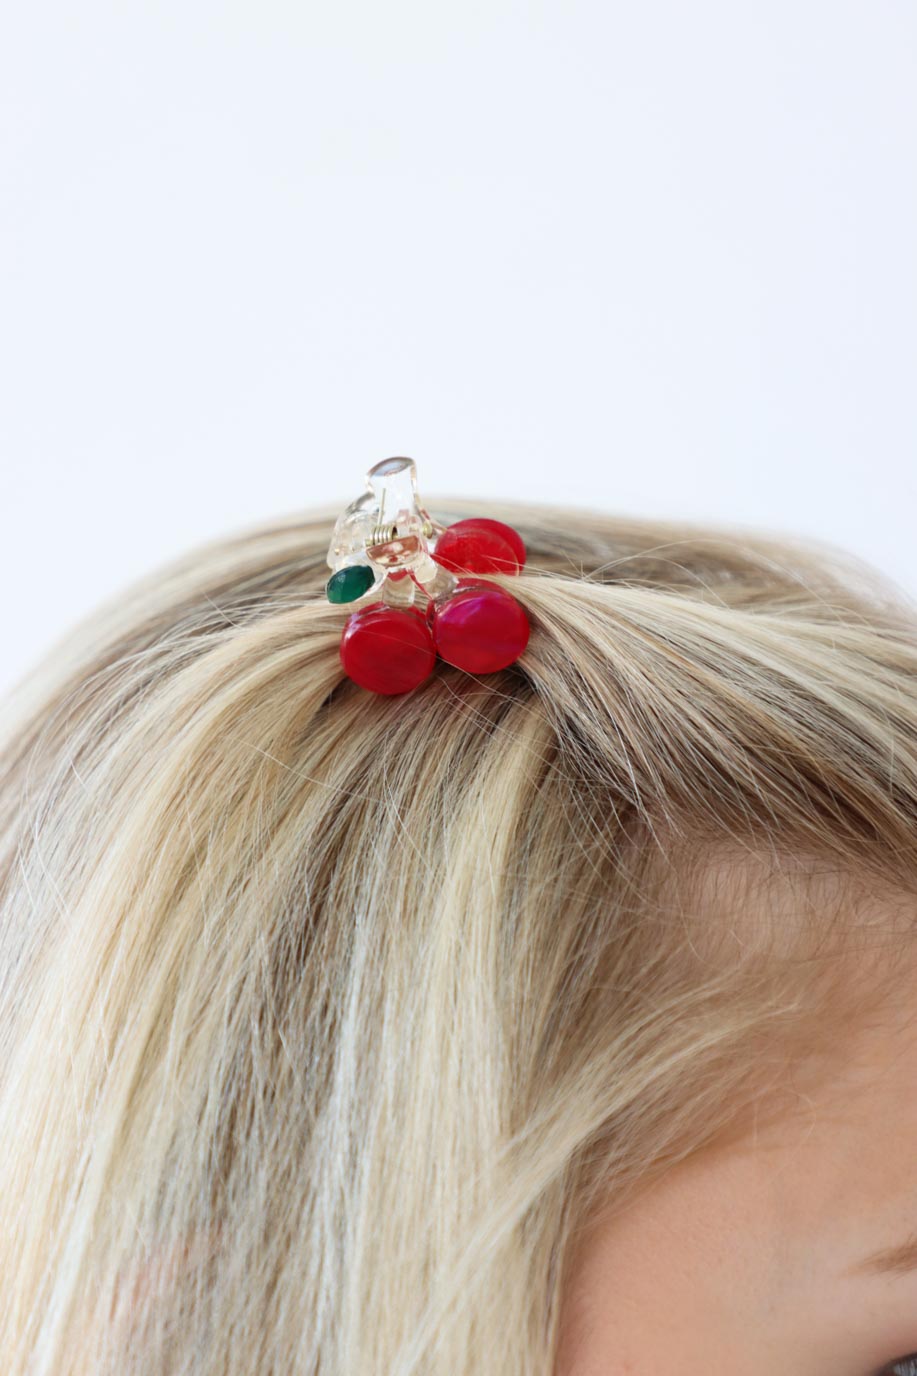 girl wearing small red cherry clip in her hair